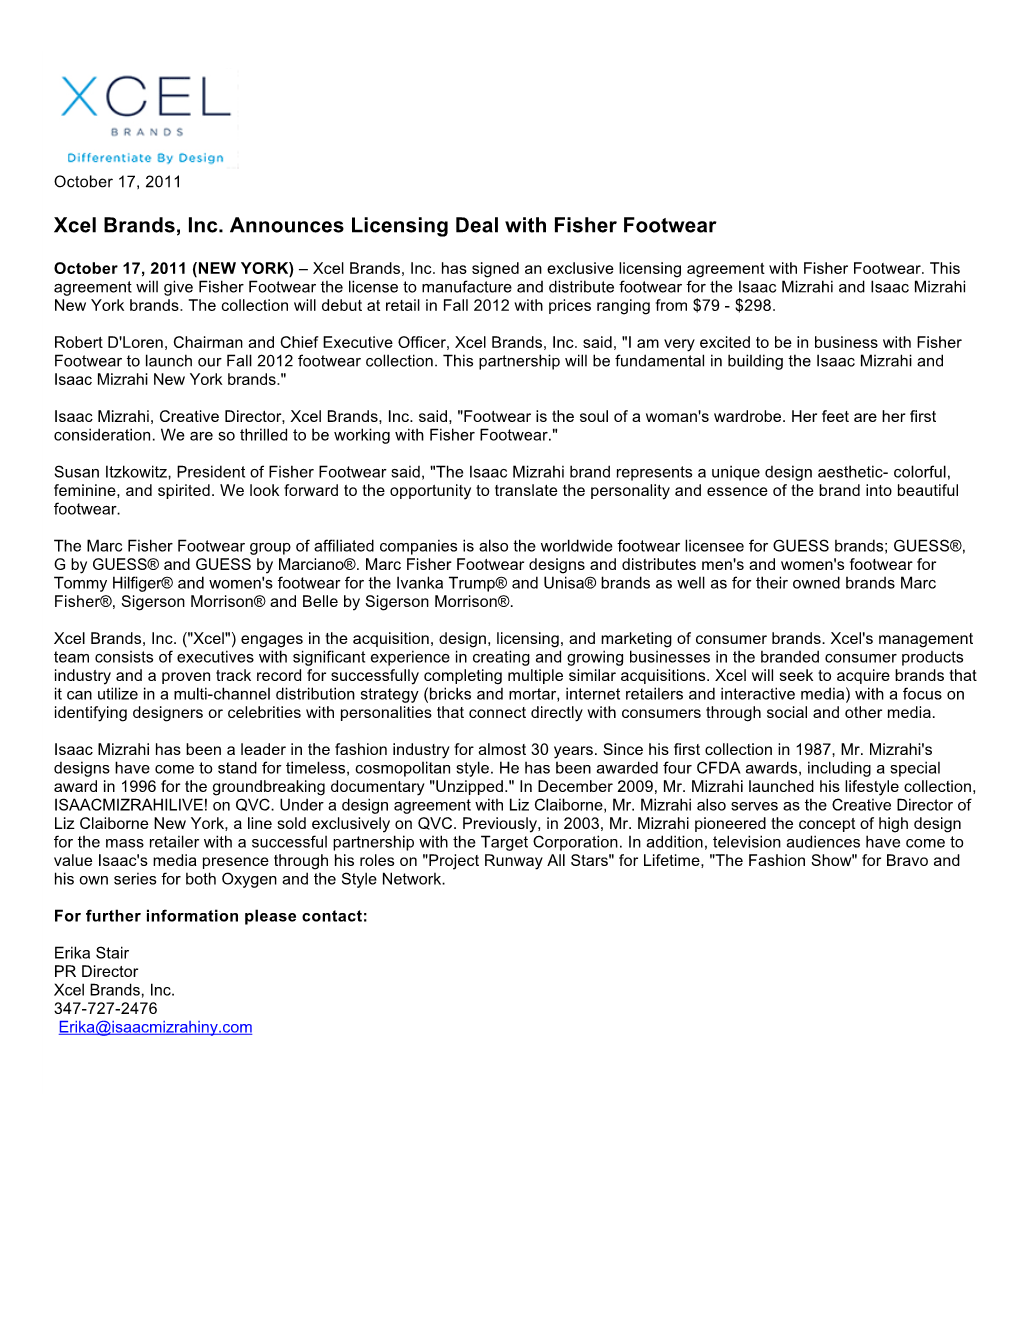 Xcel Brands, Inc. Announces Licensing Deal with Fisher Footwear